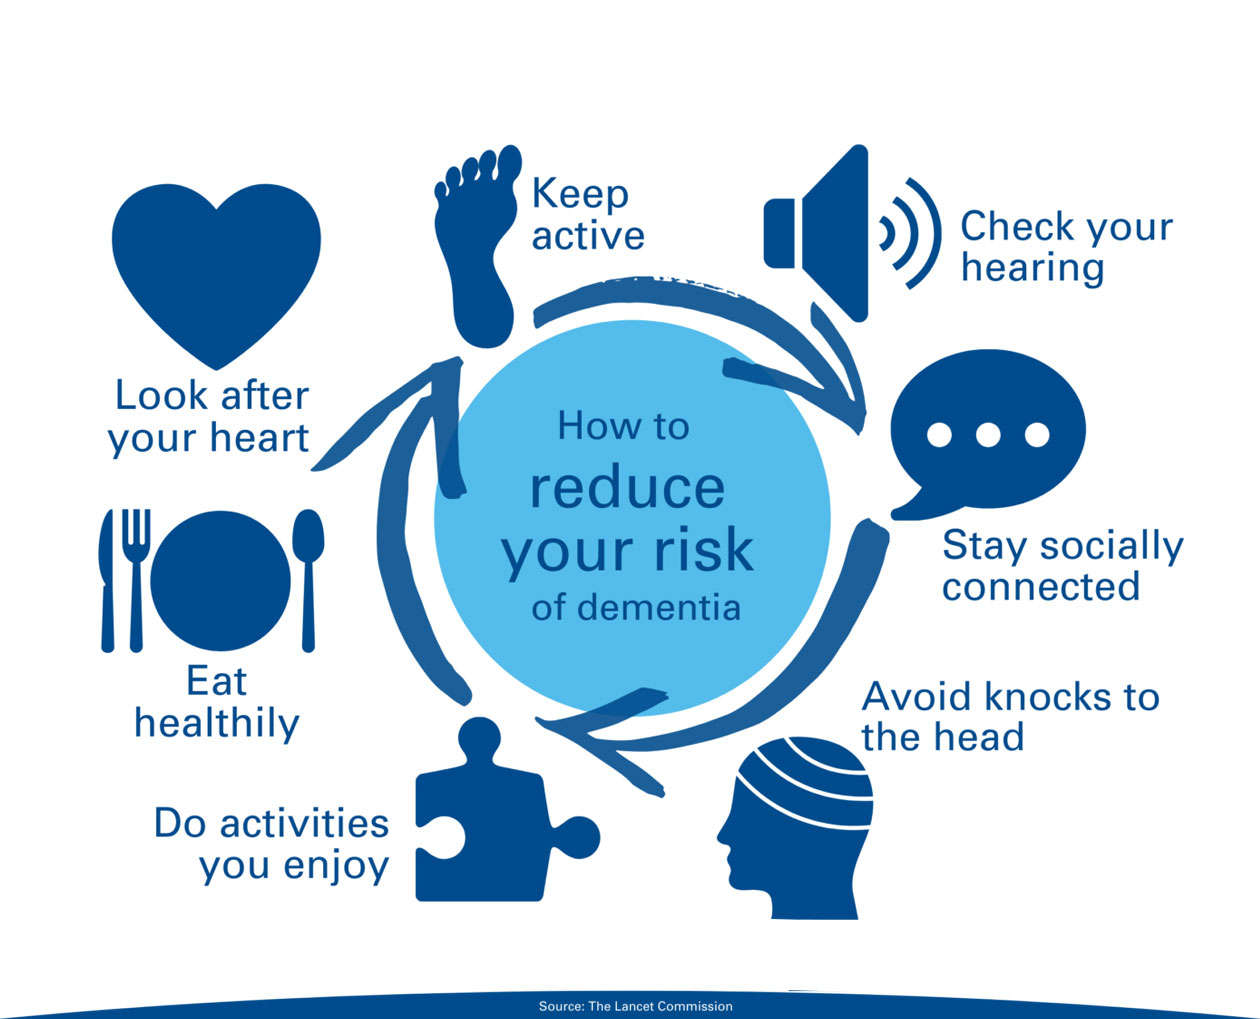 How to reduce your risk of dementia flow chart
-keep active
-check your hearing
-stay socially connected
-avoid knocks to the head
-do activities you enjoy
-eat healthily
-look after your heart